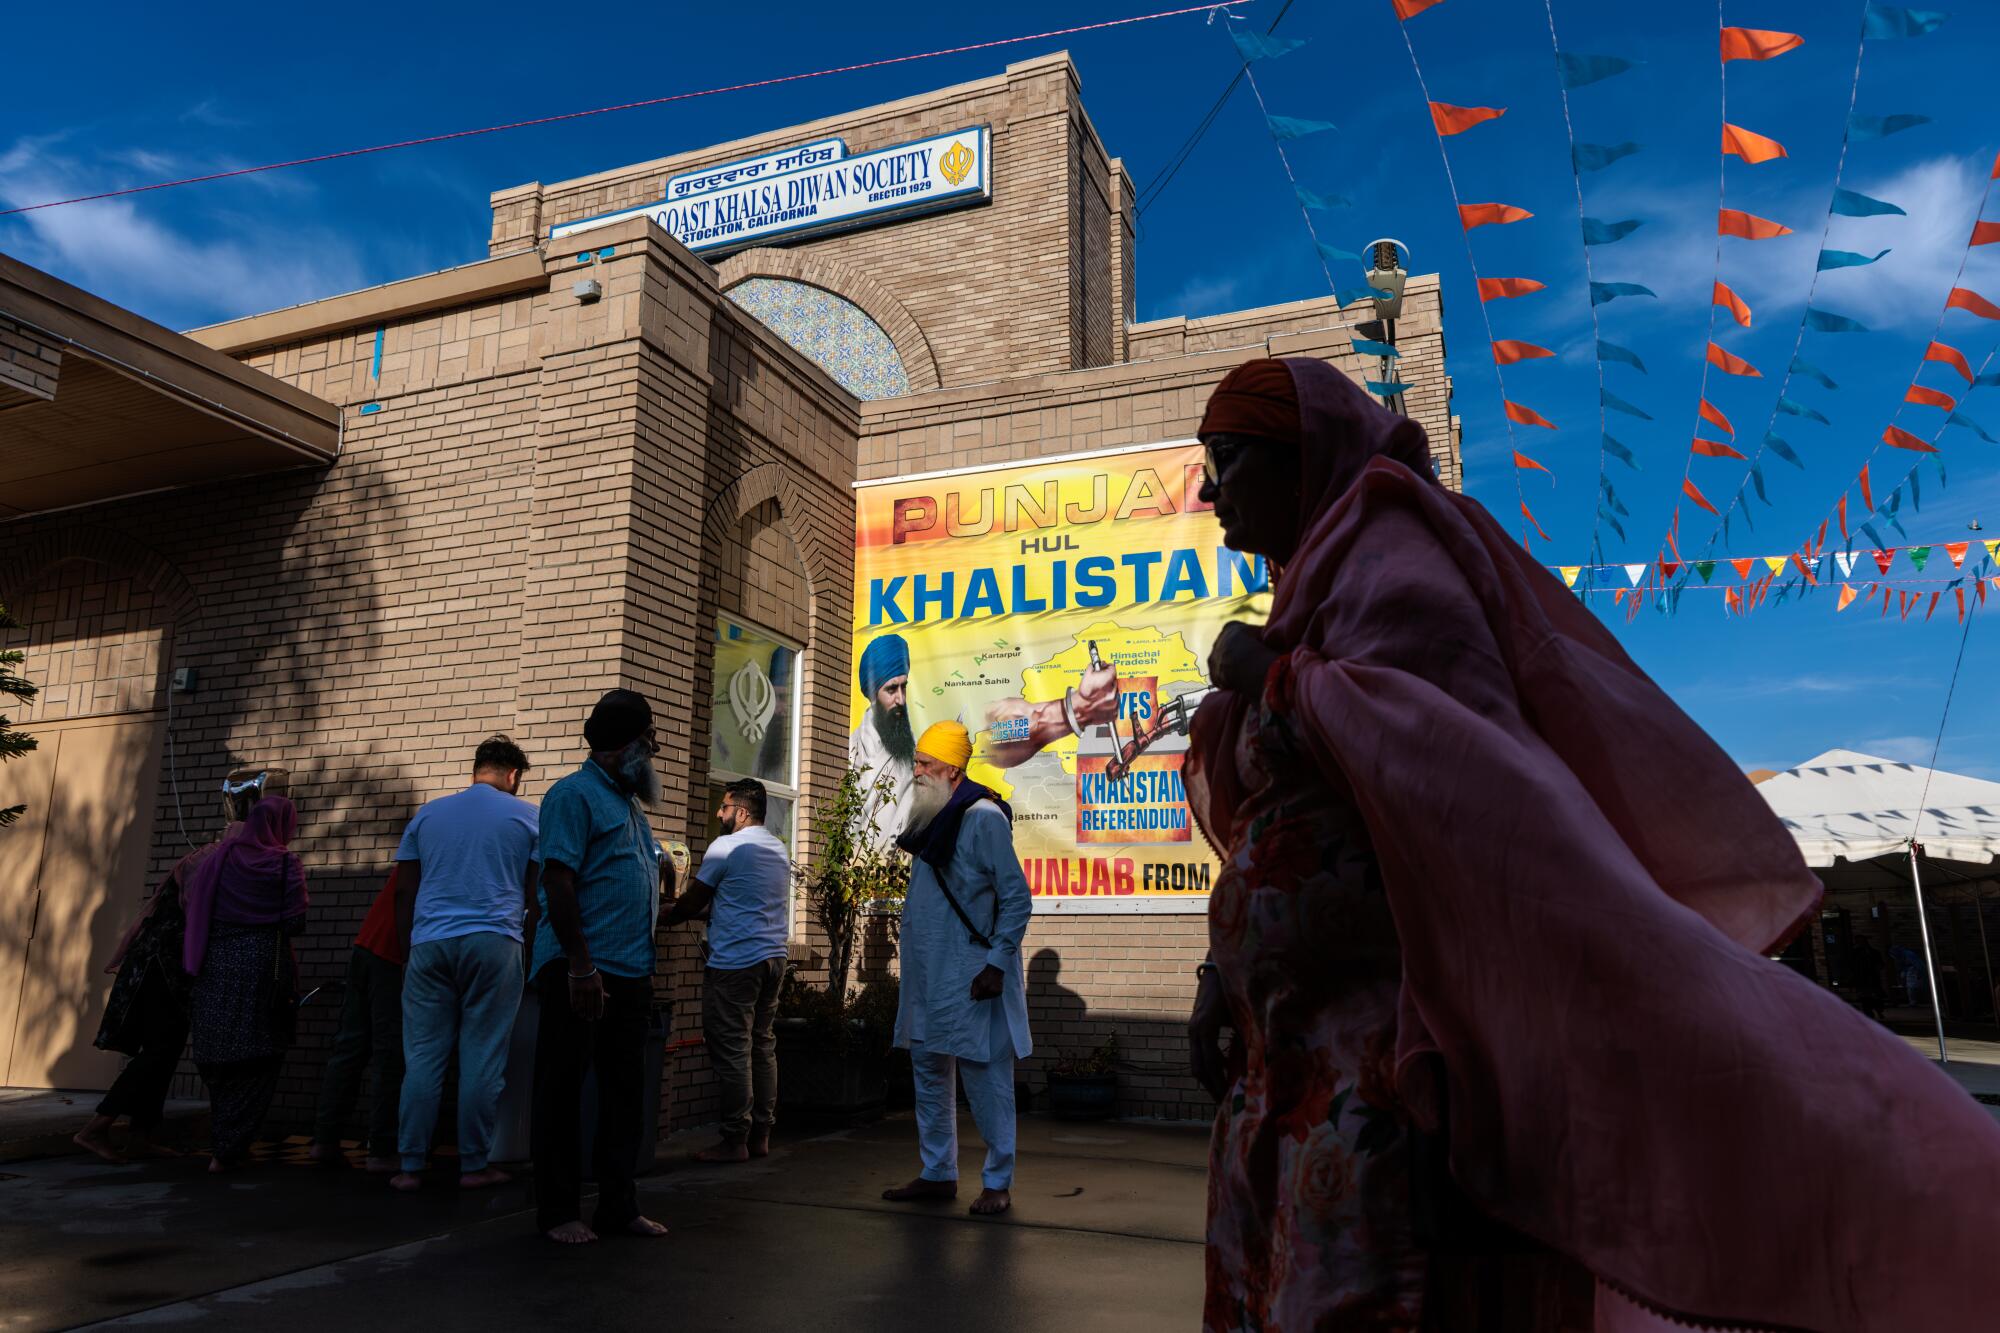 People stand near a building bearing a large yellow banner with the word "Khalistan" 